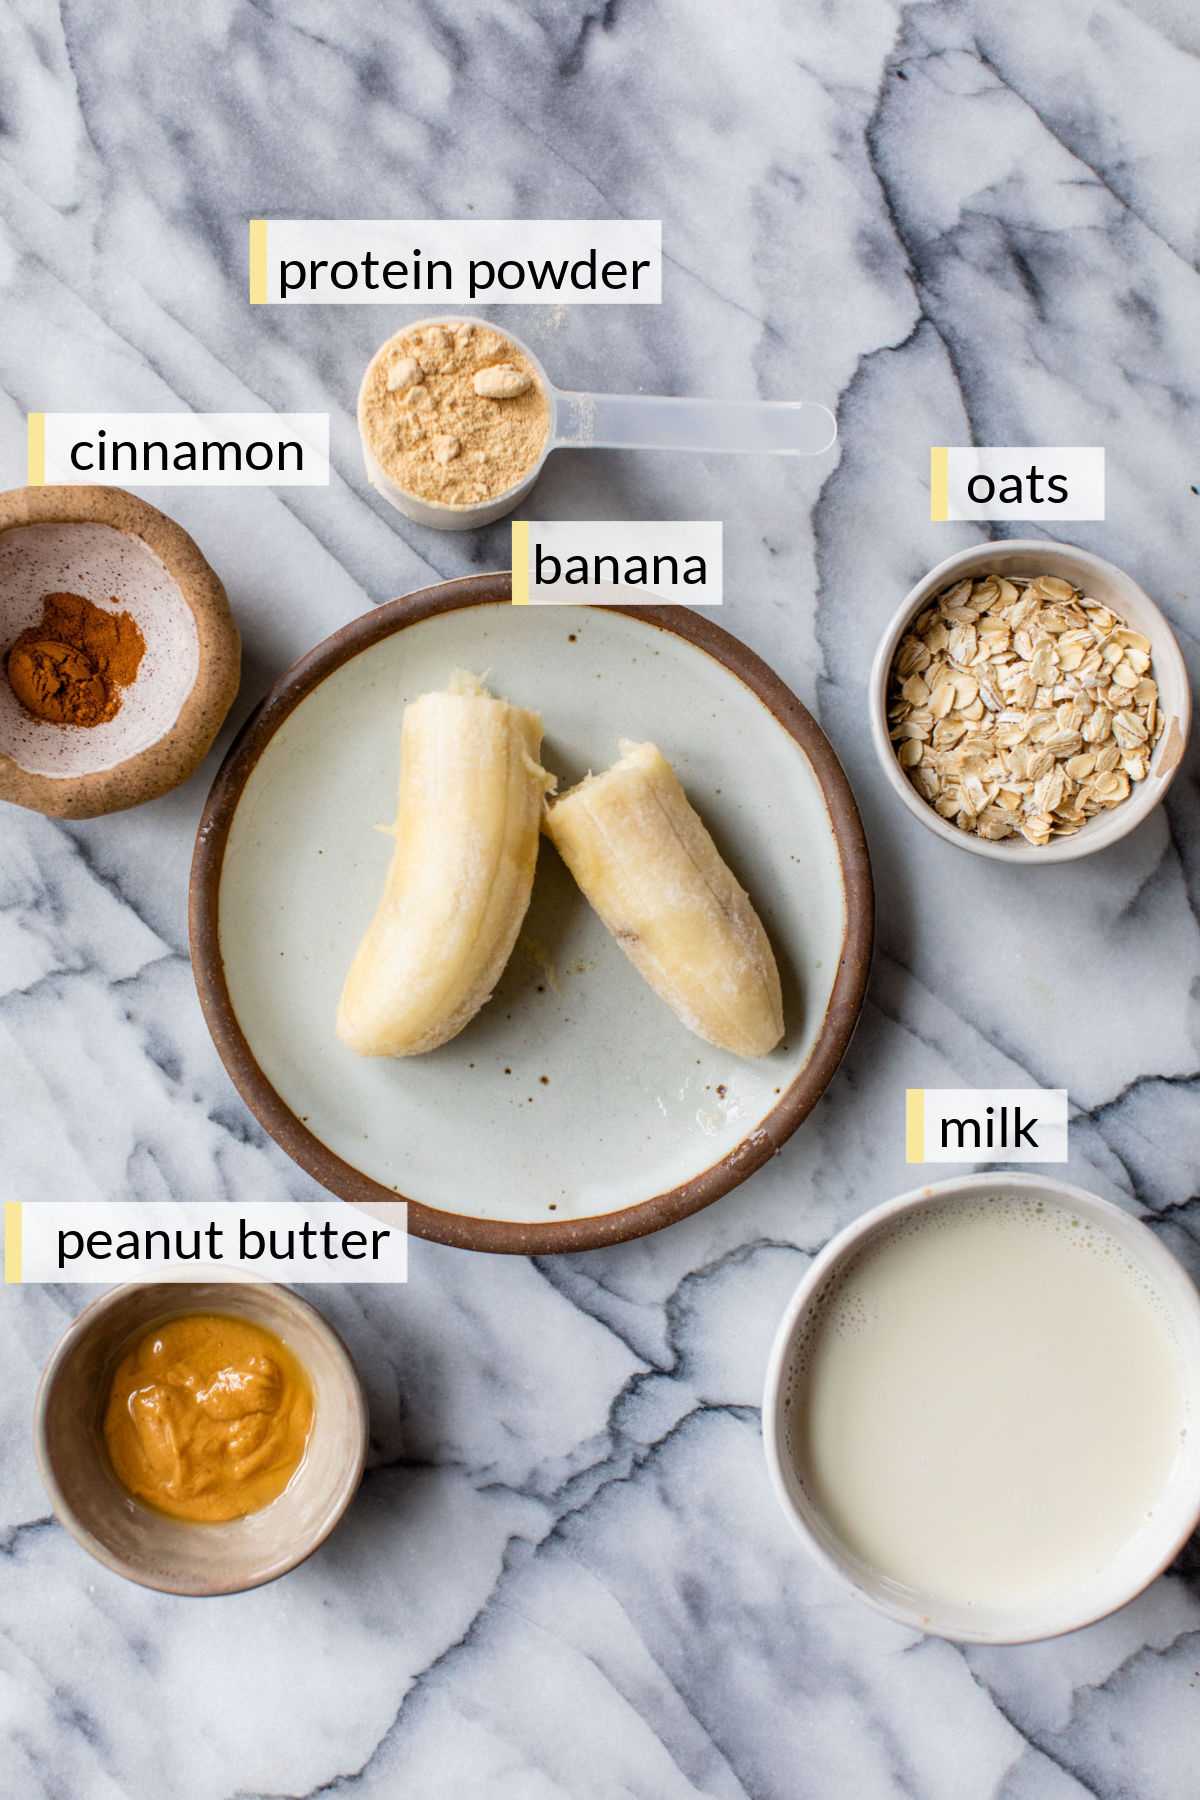 Banana on a plate near oats, milk, peanut butter and protein powder in small bowls.